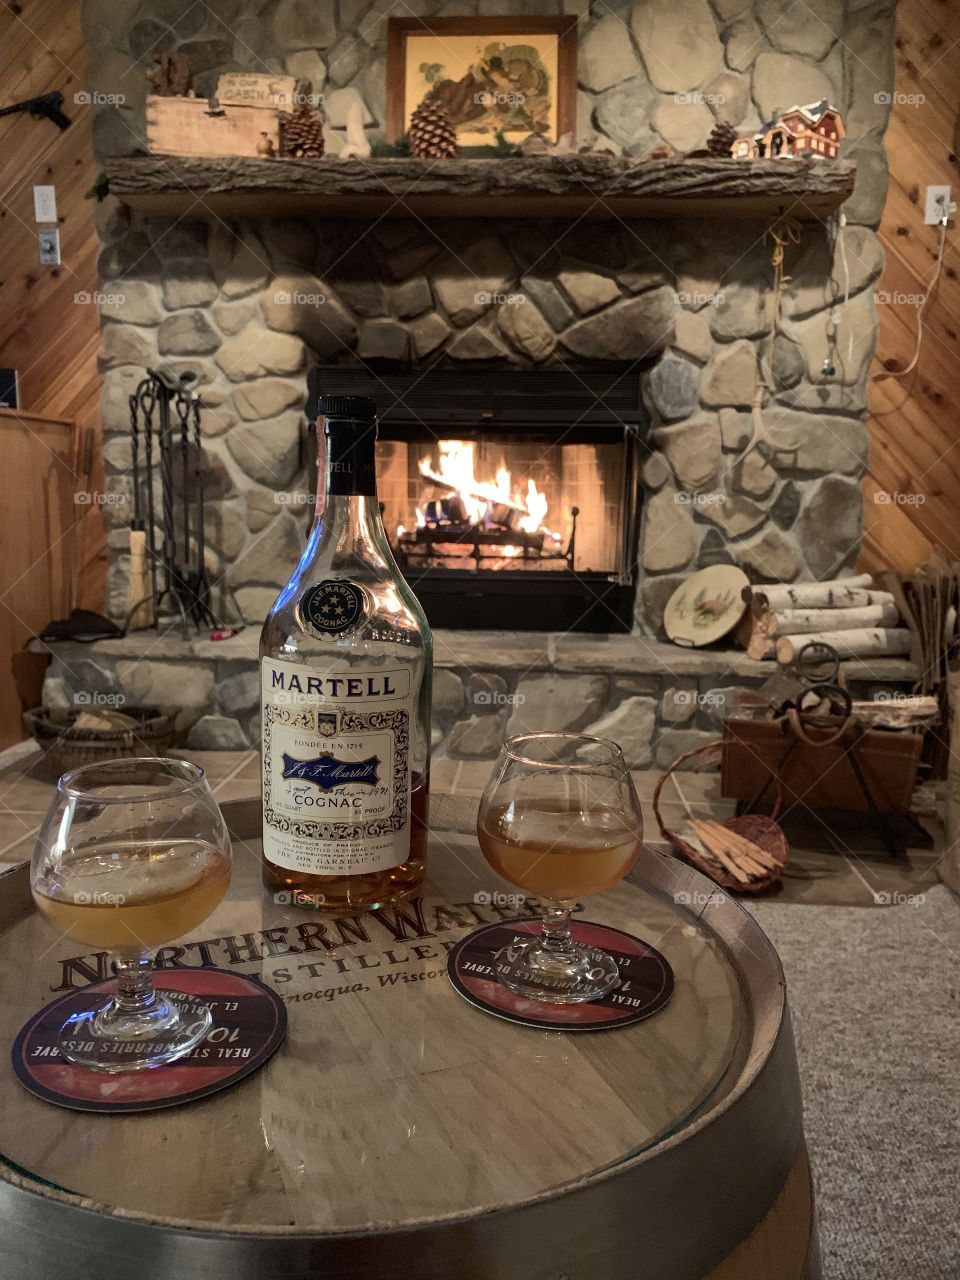 Sipping Cognac by the fire!